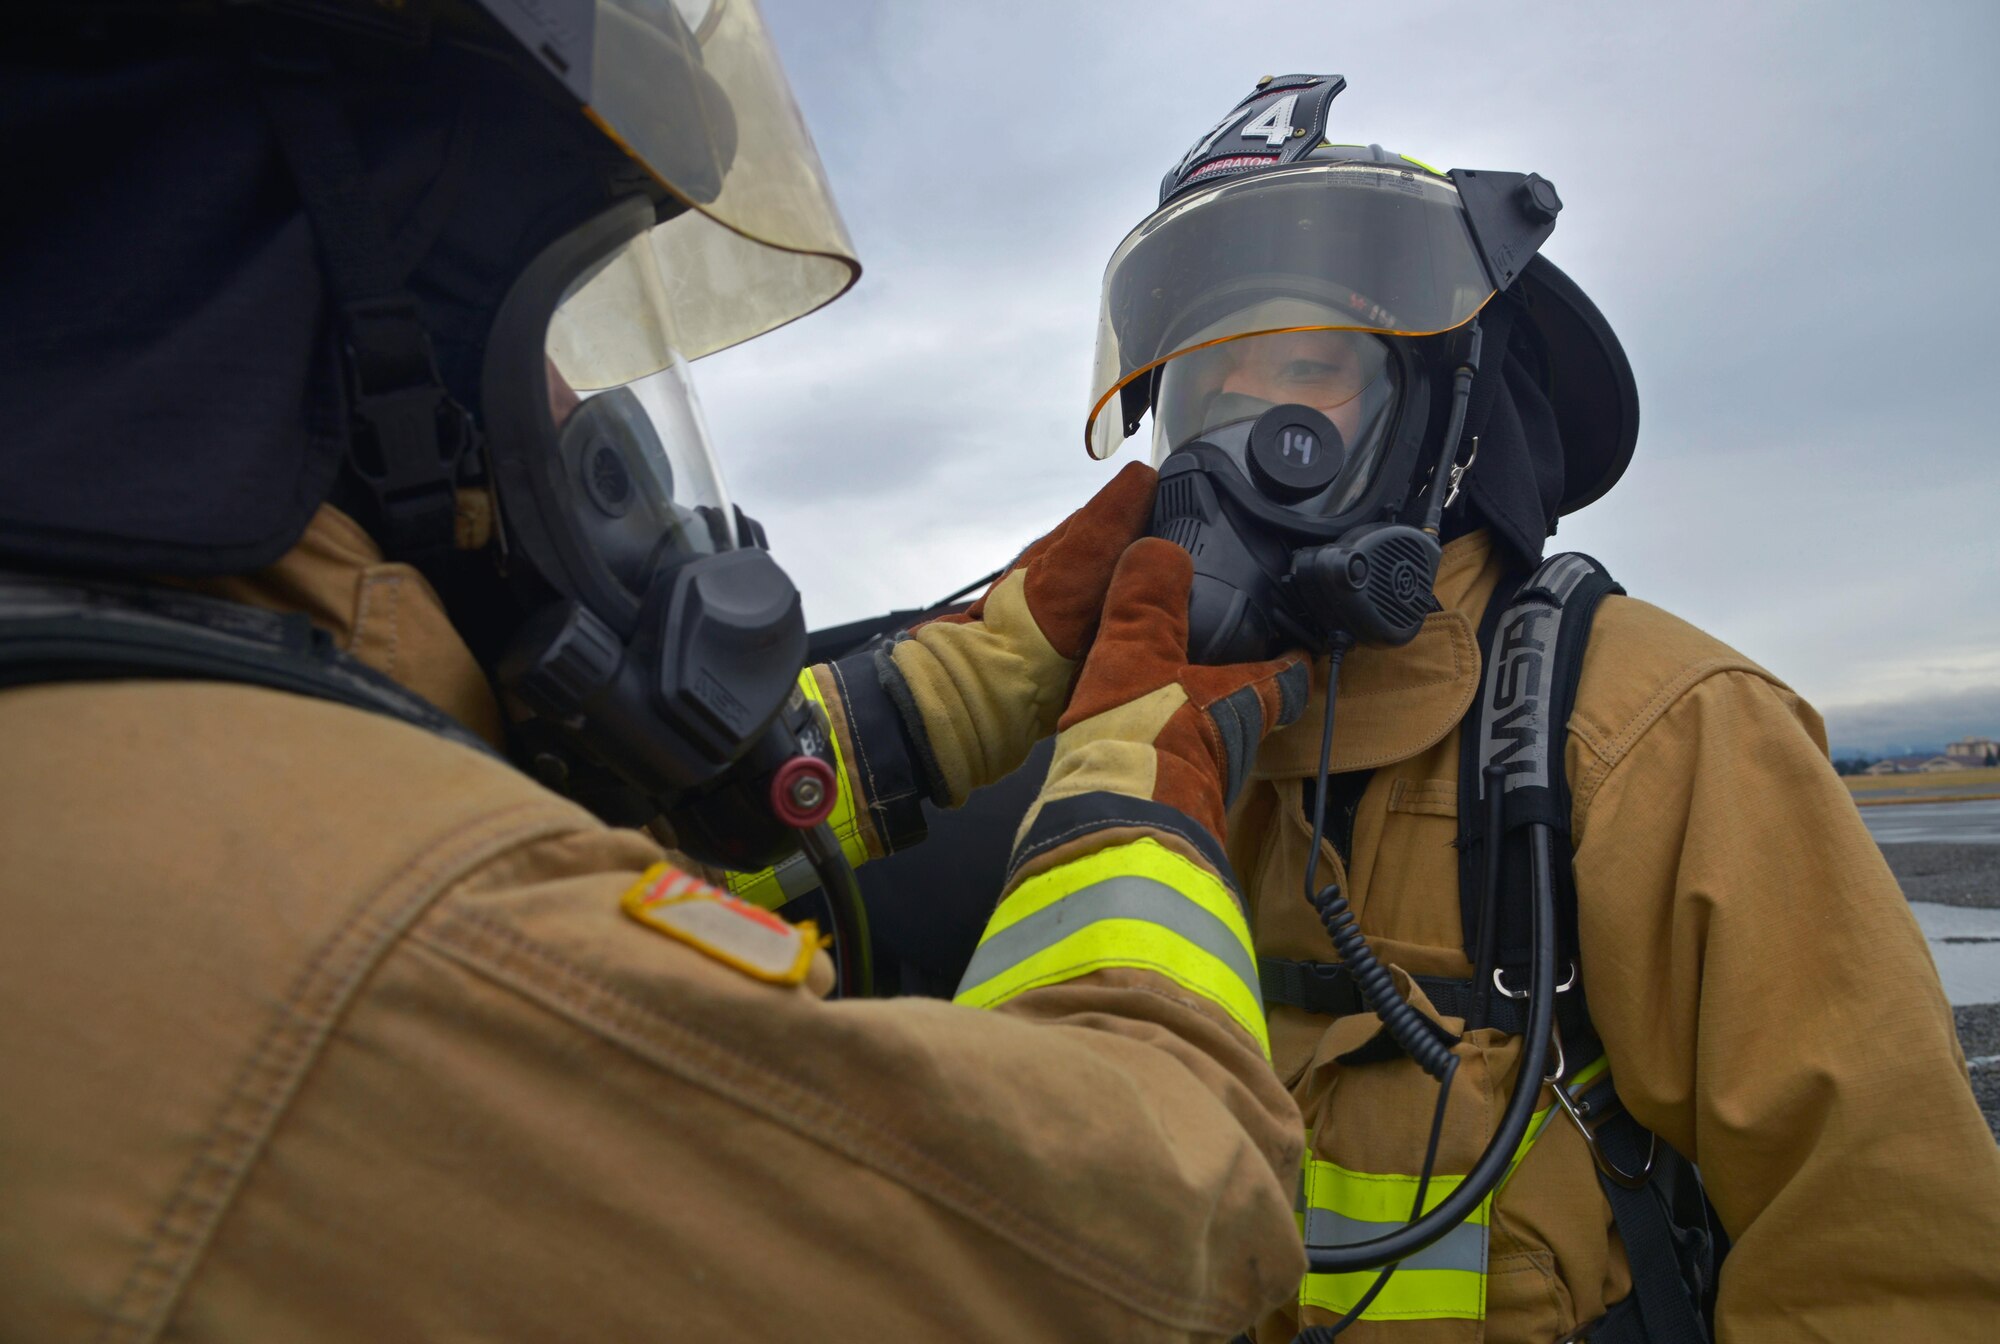 Two firefighters with the 374th Civil Engineer Squadron perform an equipment check prior to completing a training scenario at Yokota Air Base, Japan, Dec. 14, 2016. The training helped the firefighters gain experience and build cohesiveness to work as a better team for potential real-world scenarios. (U.S. Air Force photo by Staff Sgt. David Owsianka)